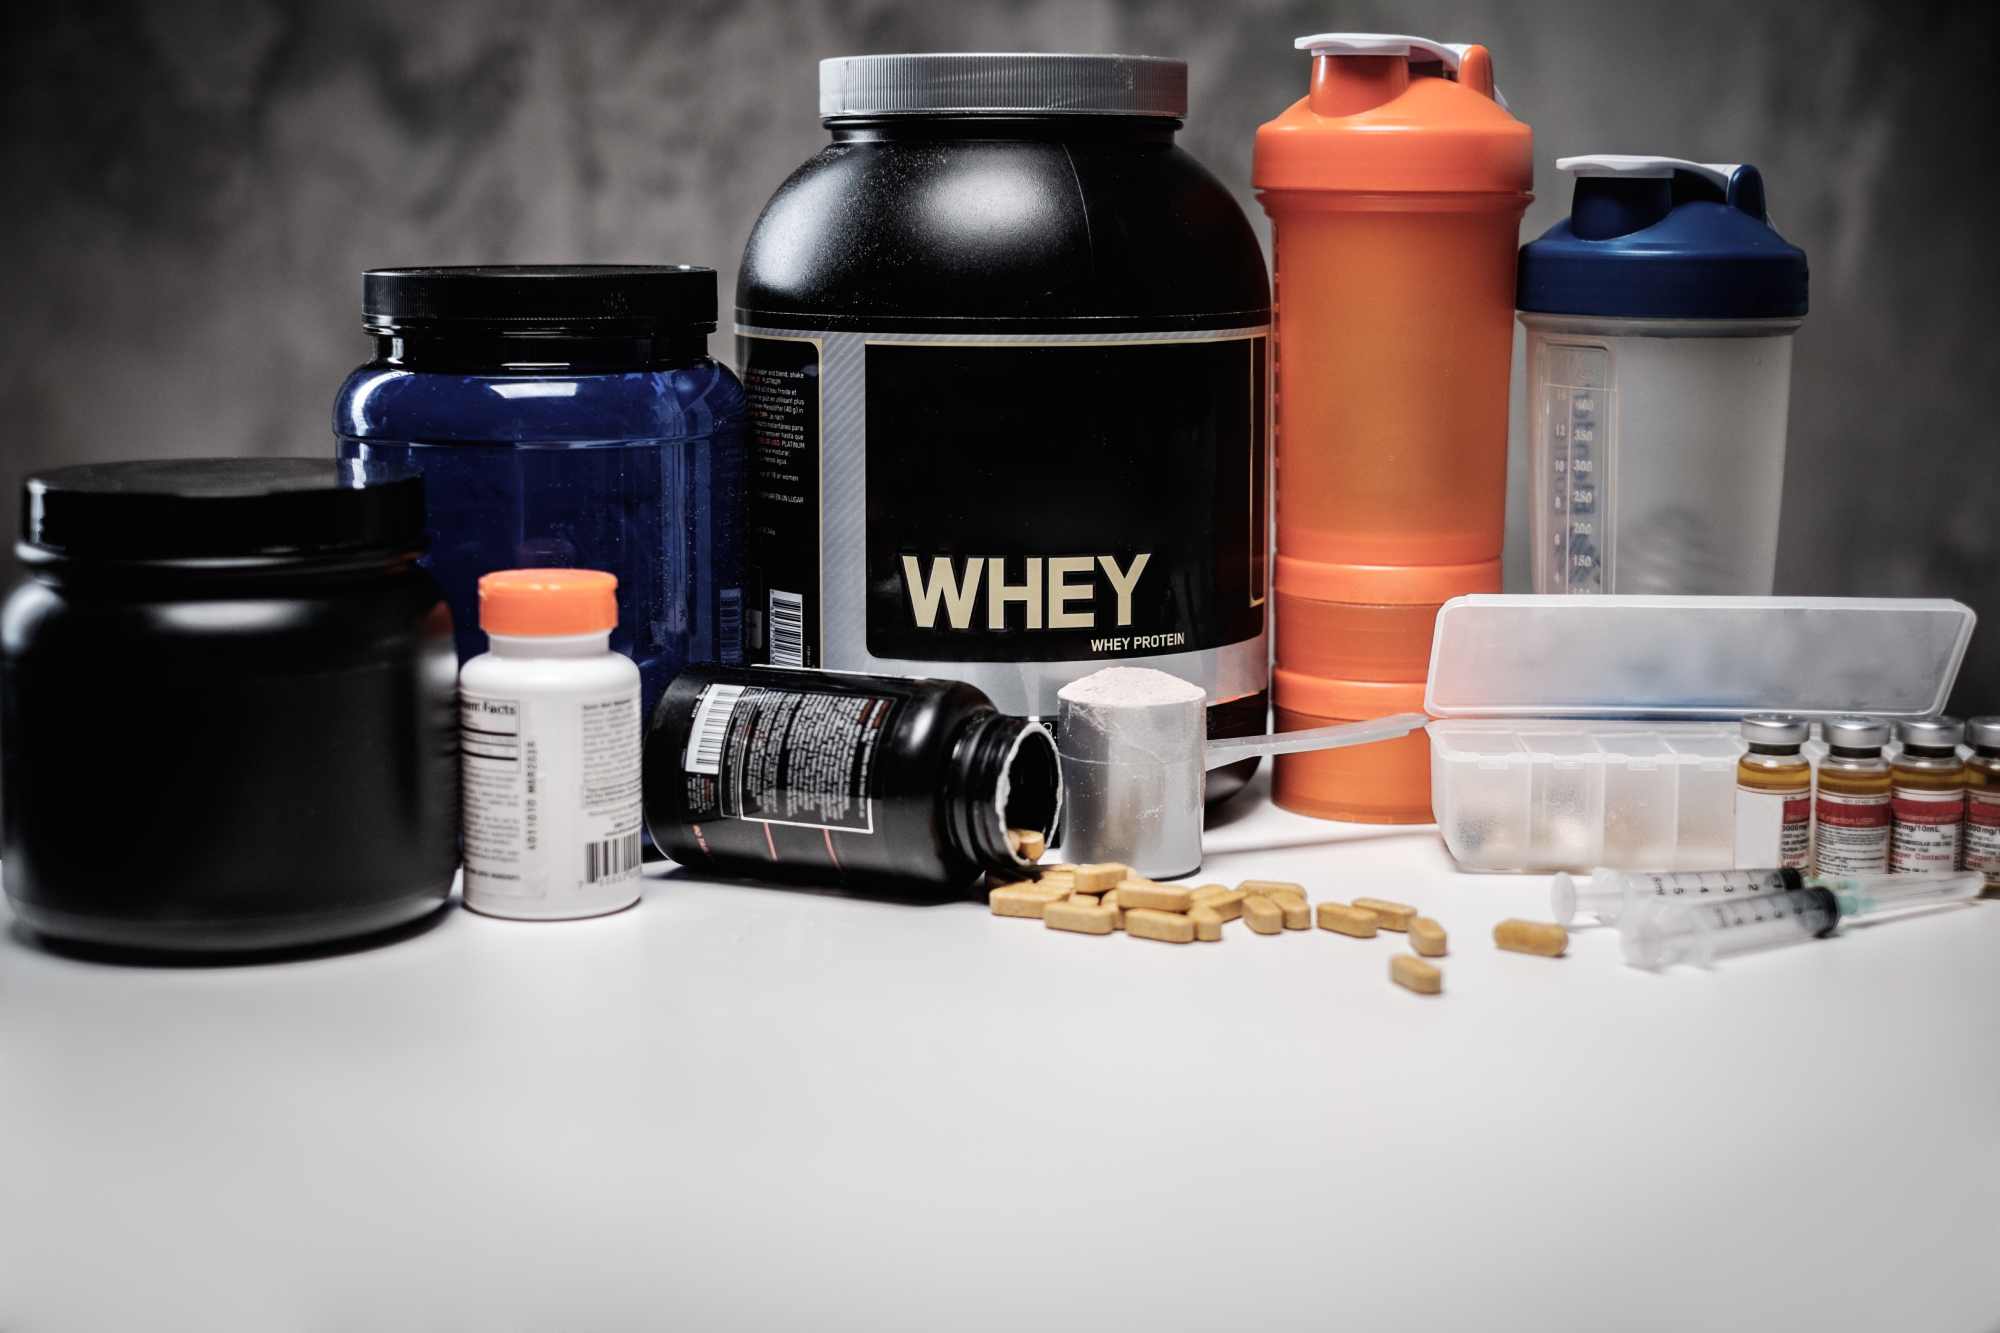 Supplements and bodybuilding support